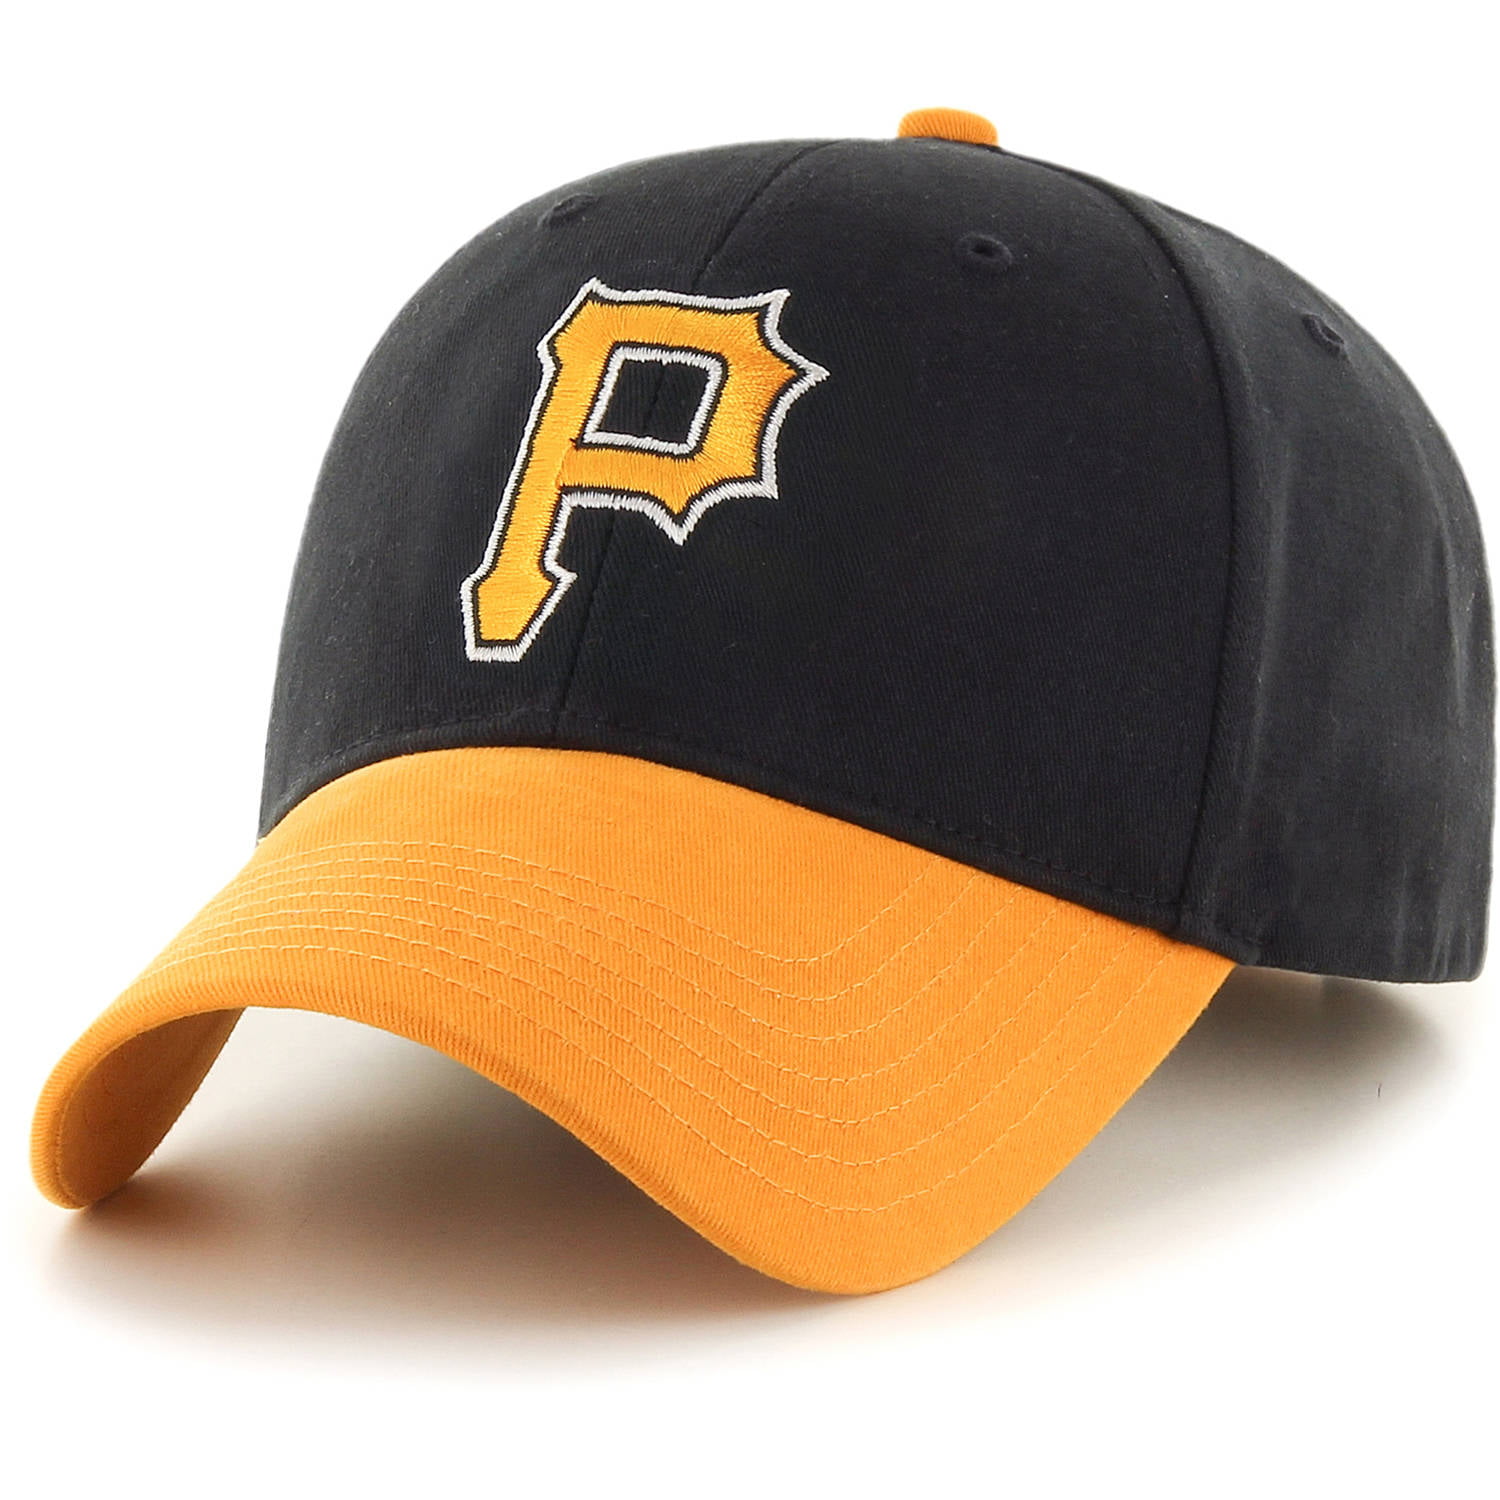 MLB Pittsburgh Pirates Reverse Basic Adjustable Cap/Hat by Fan